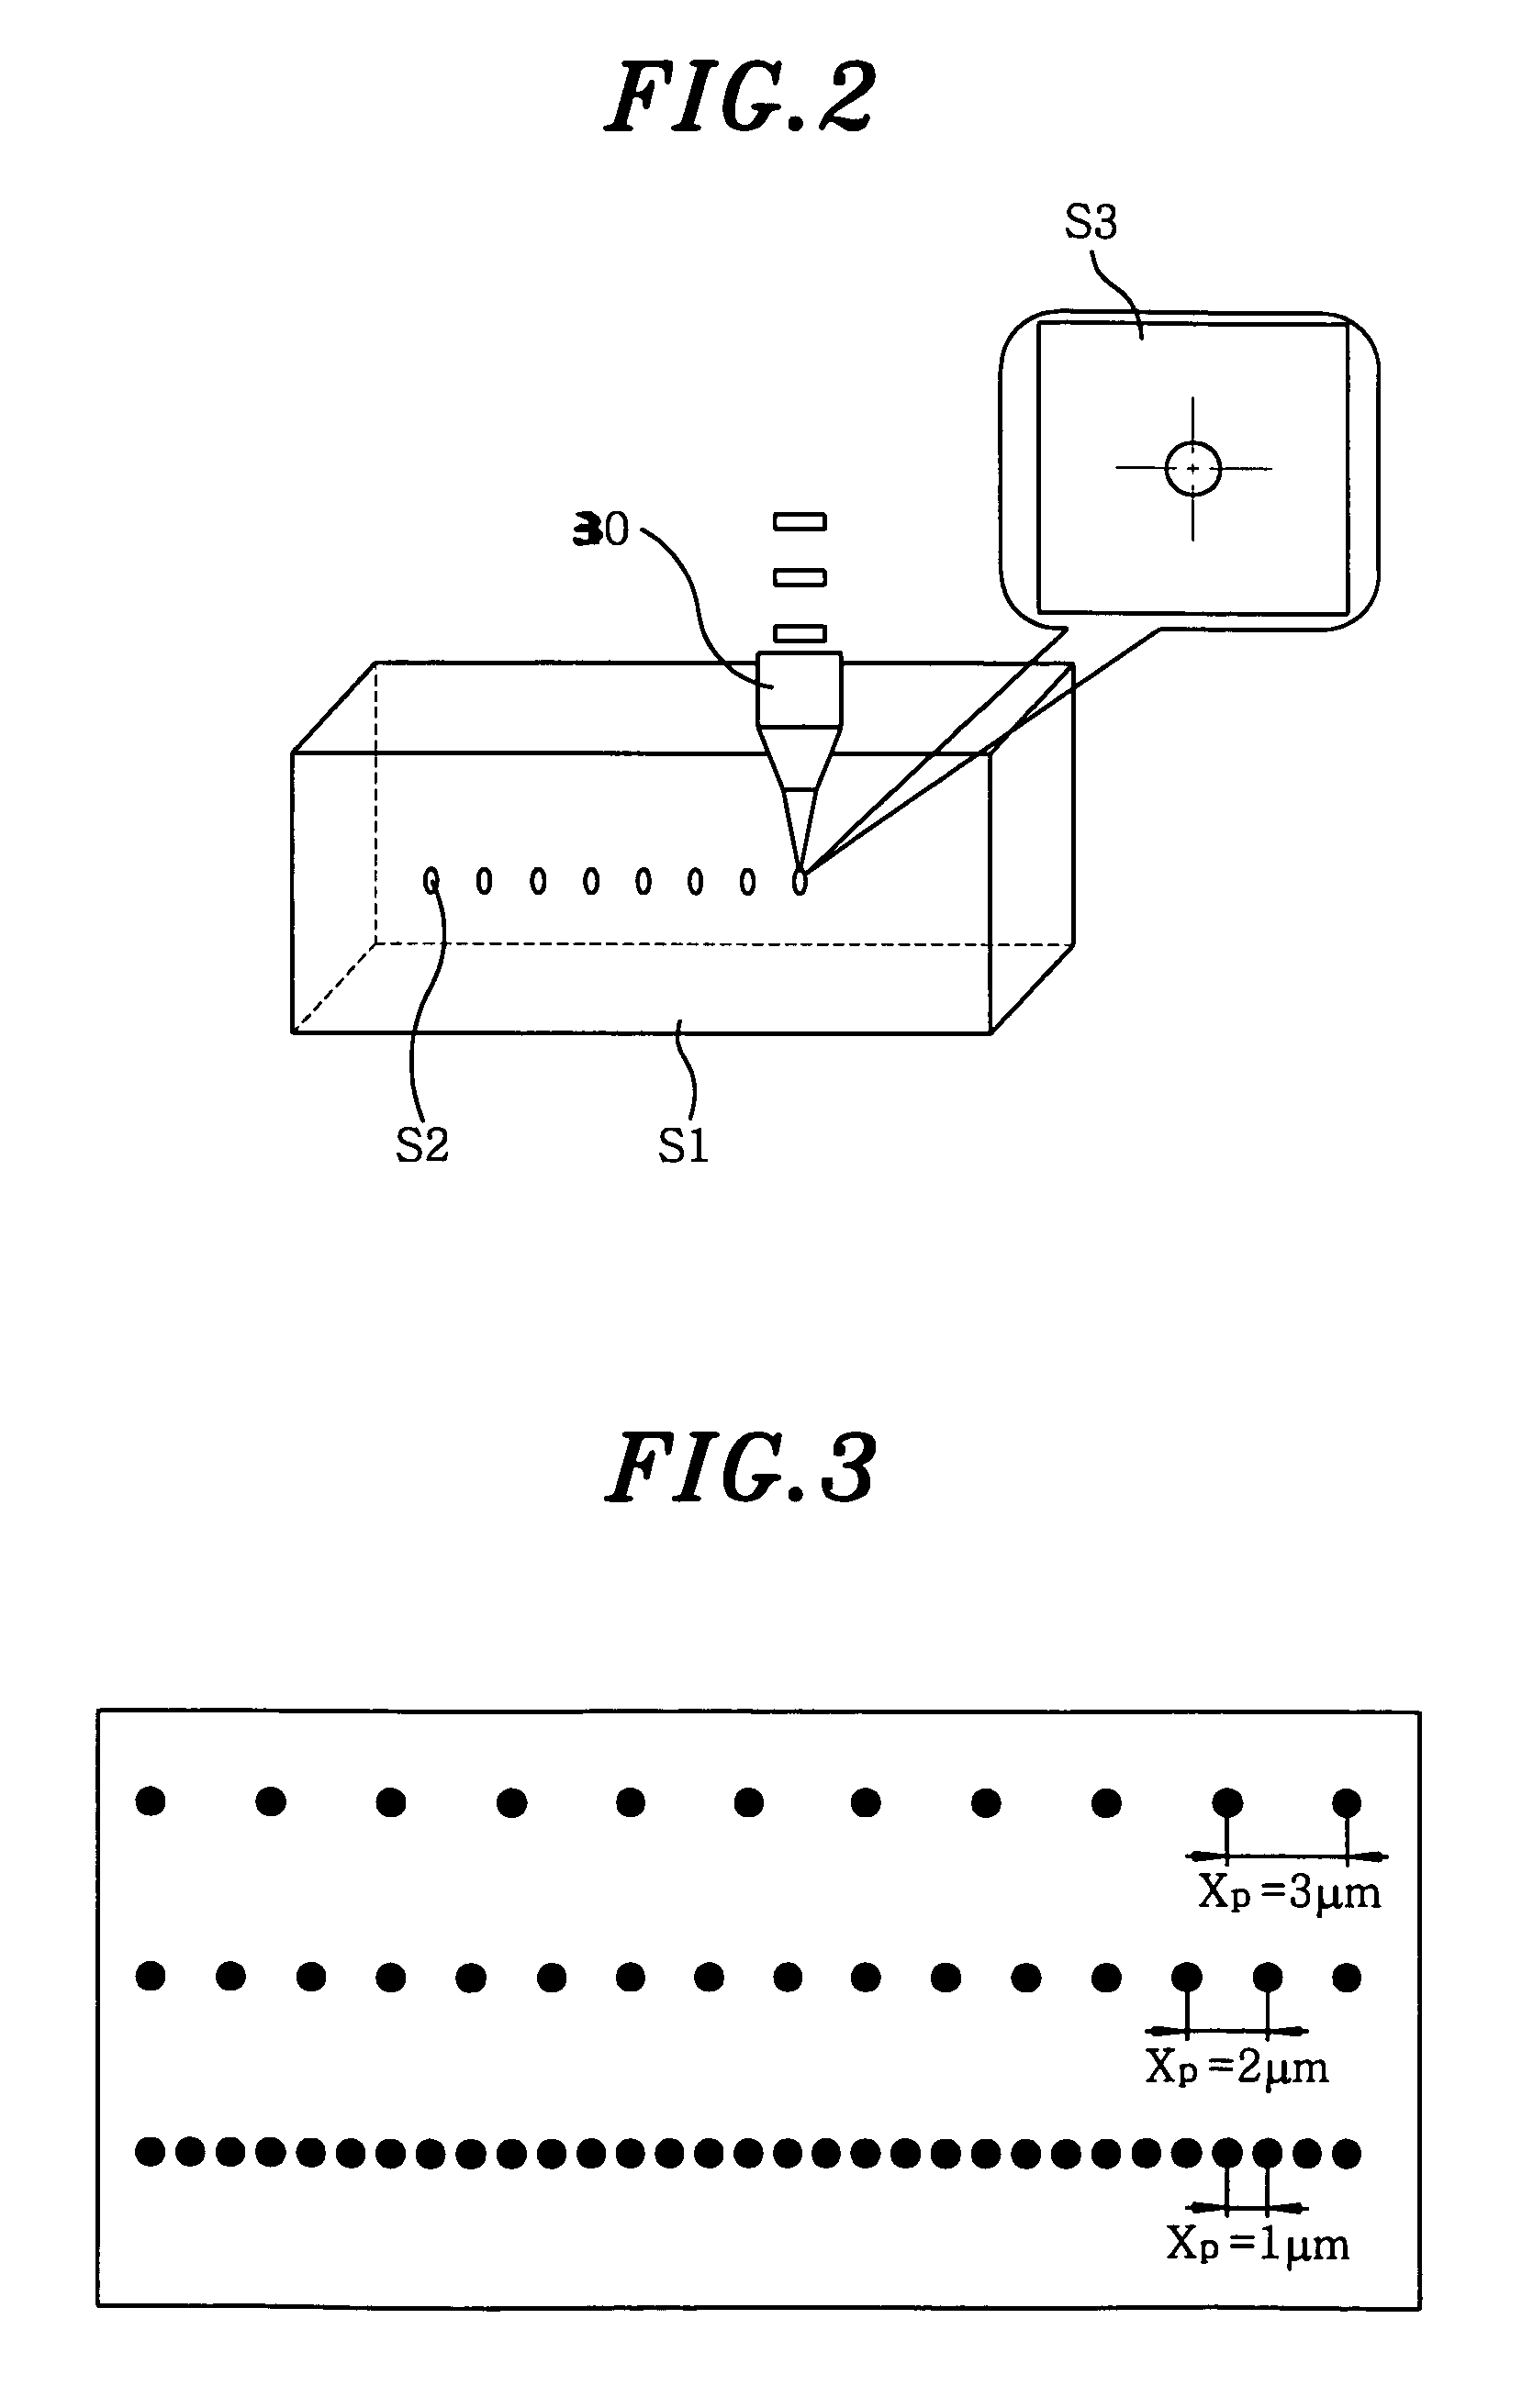 Method and system for forming periodic pulse patterns